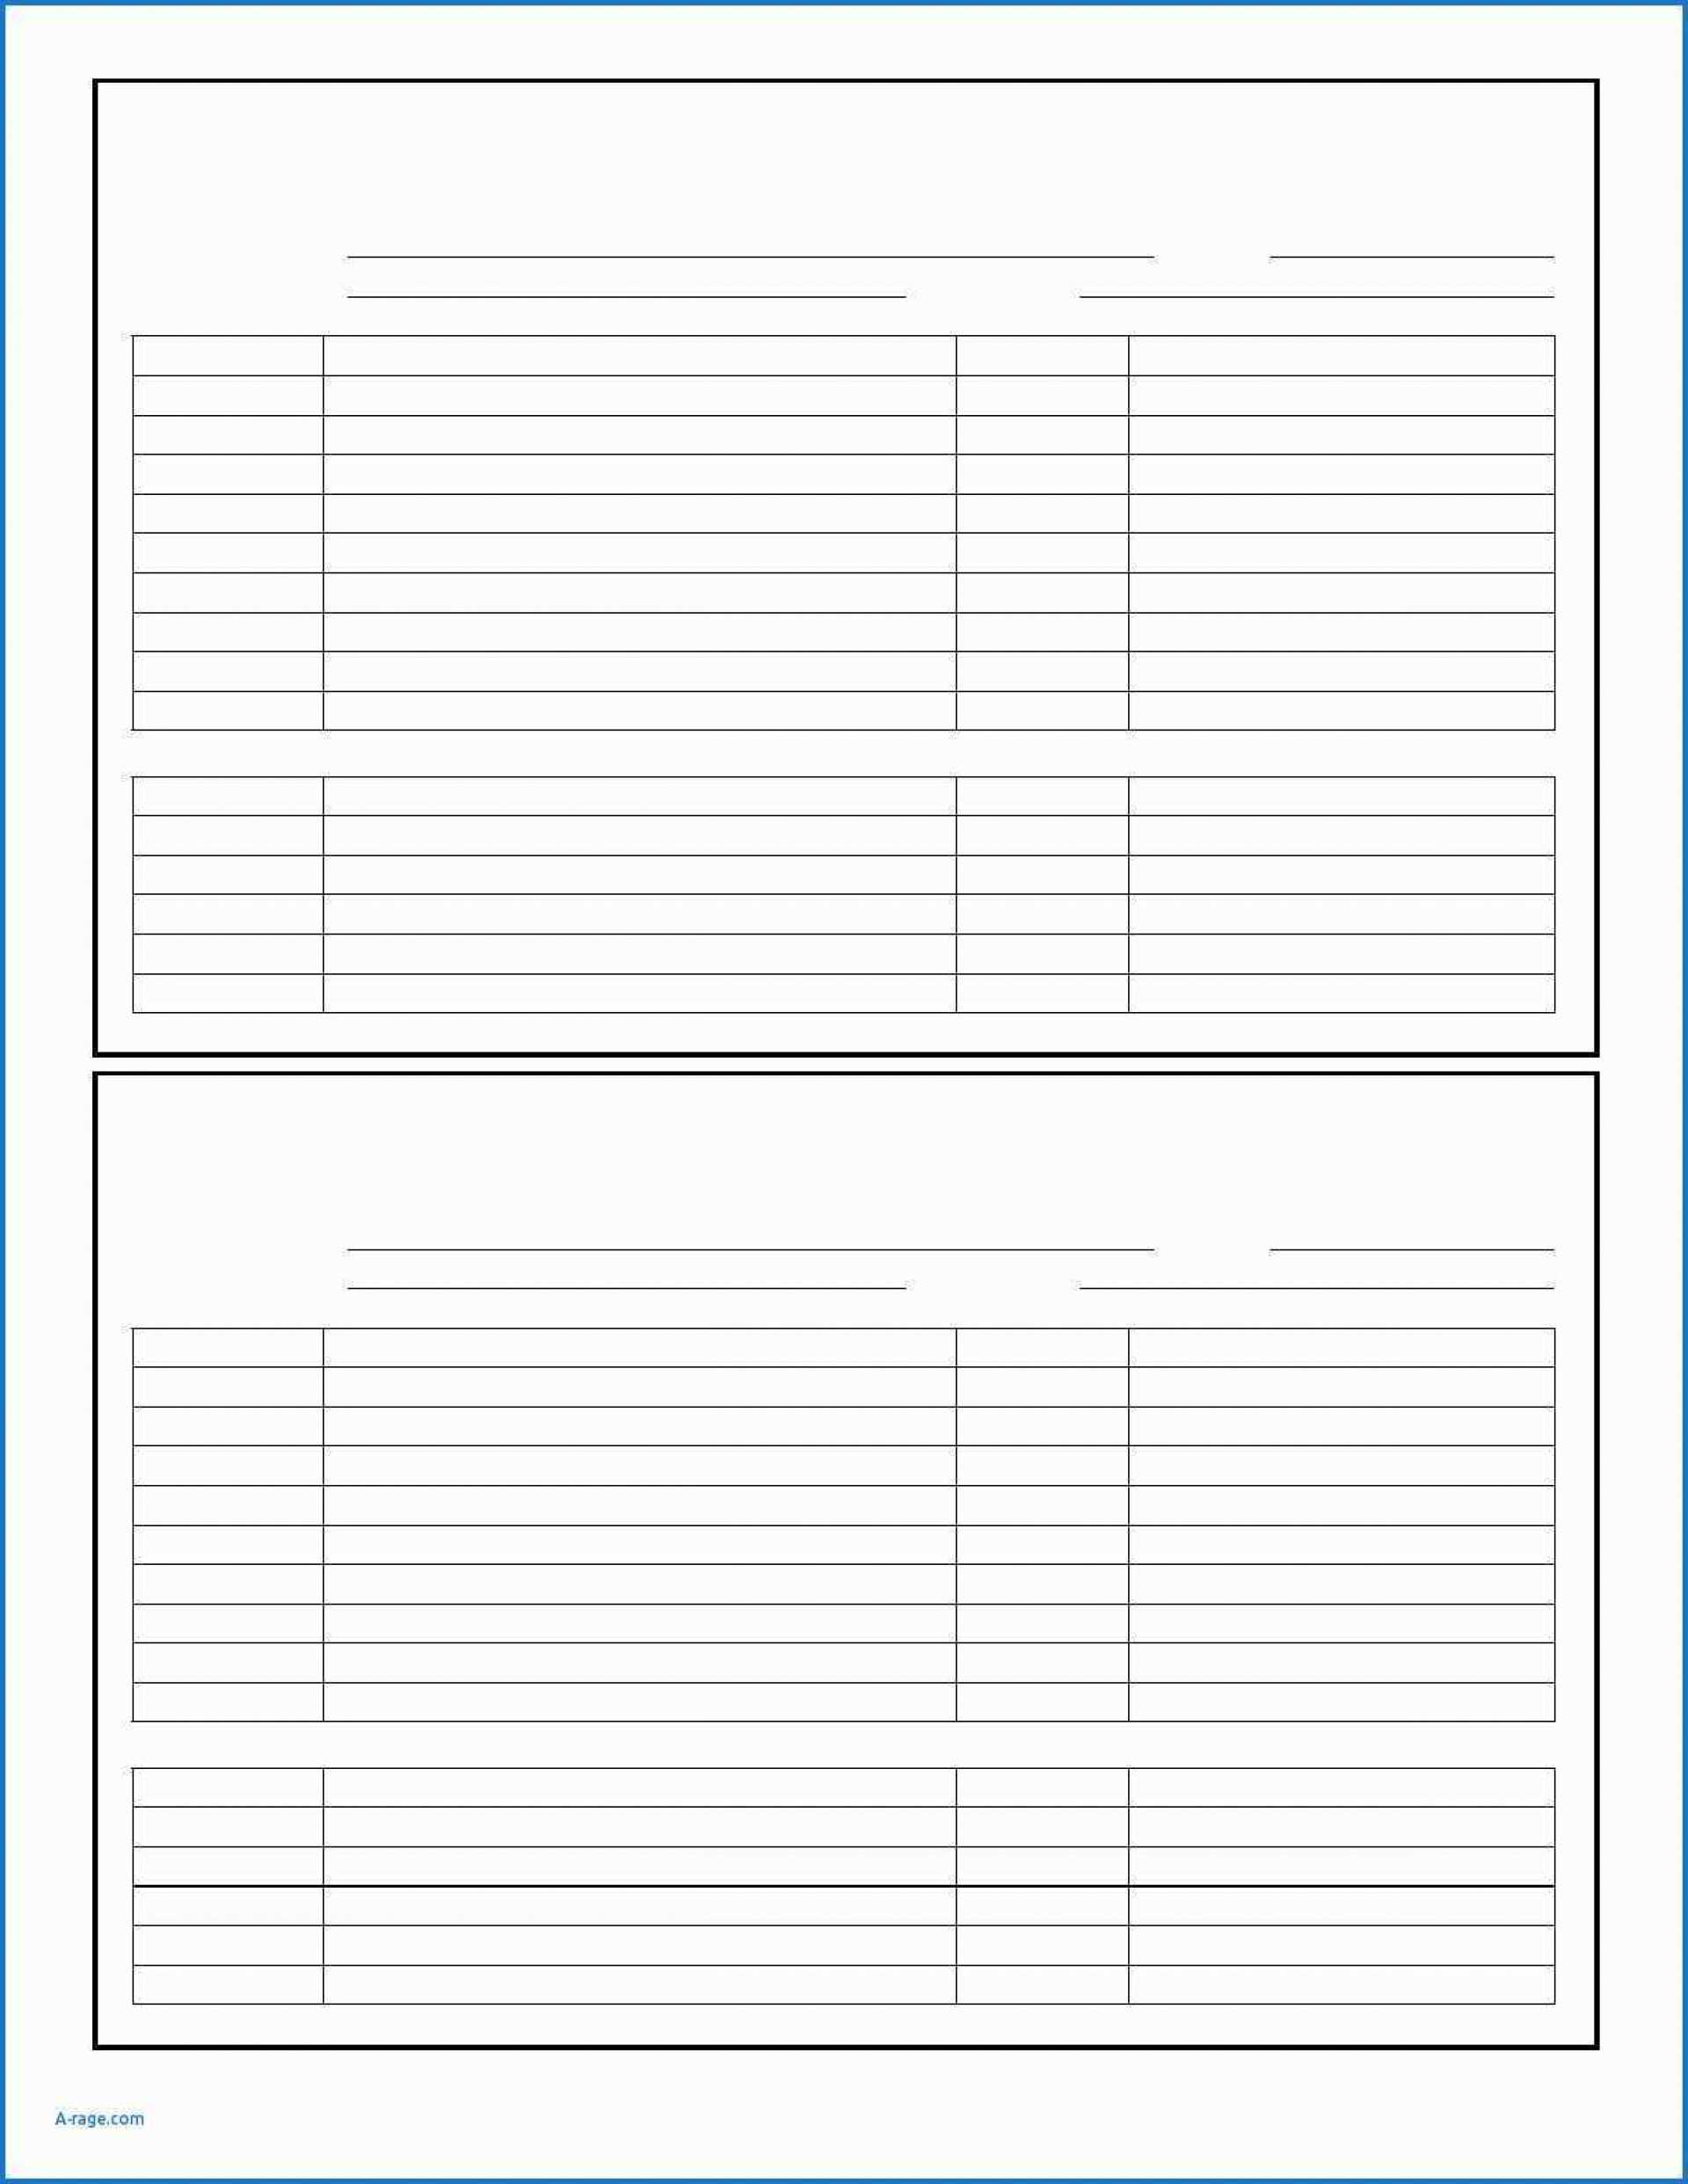 040 Fillable And Fastpitch Softball Lineup Cards Baseball In Softball Lineup Card Template